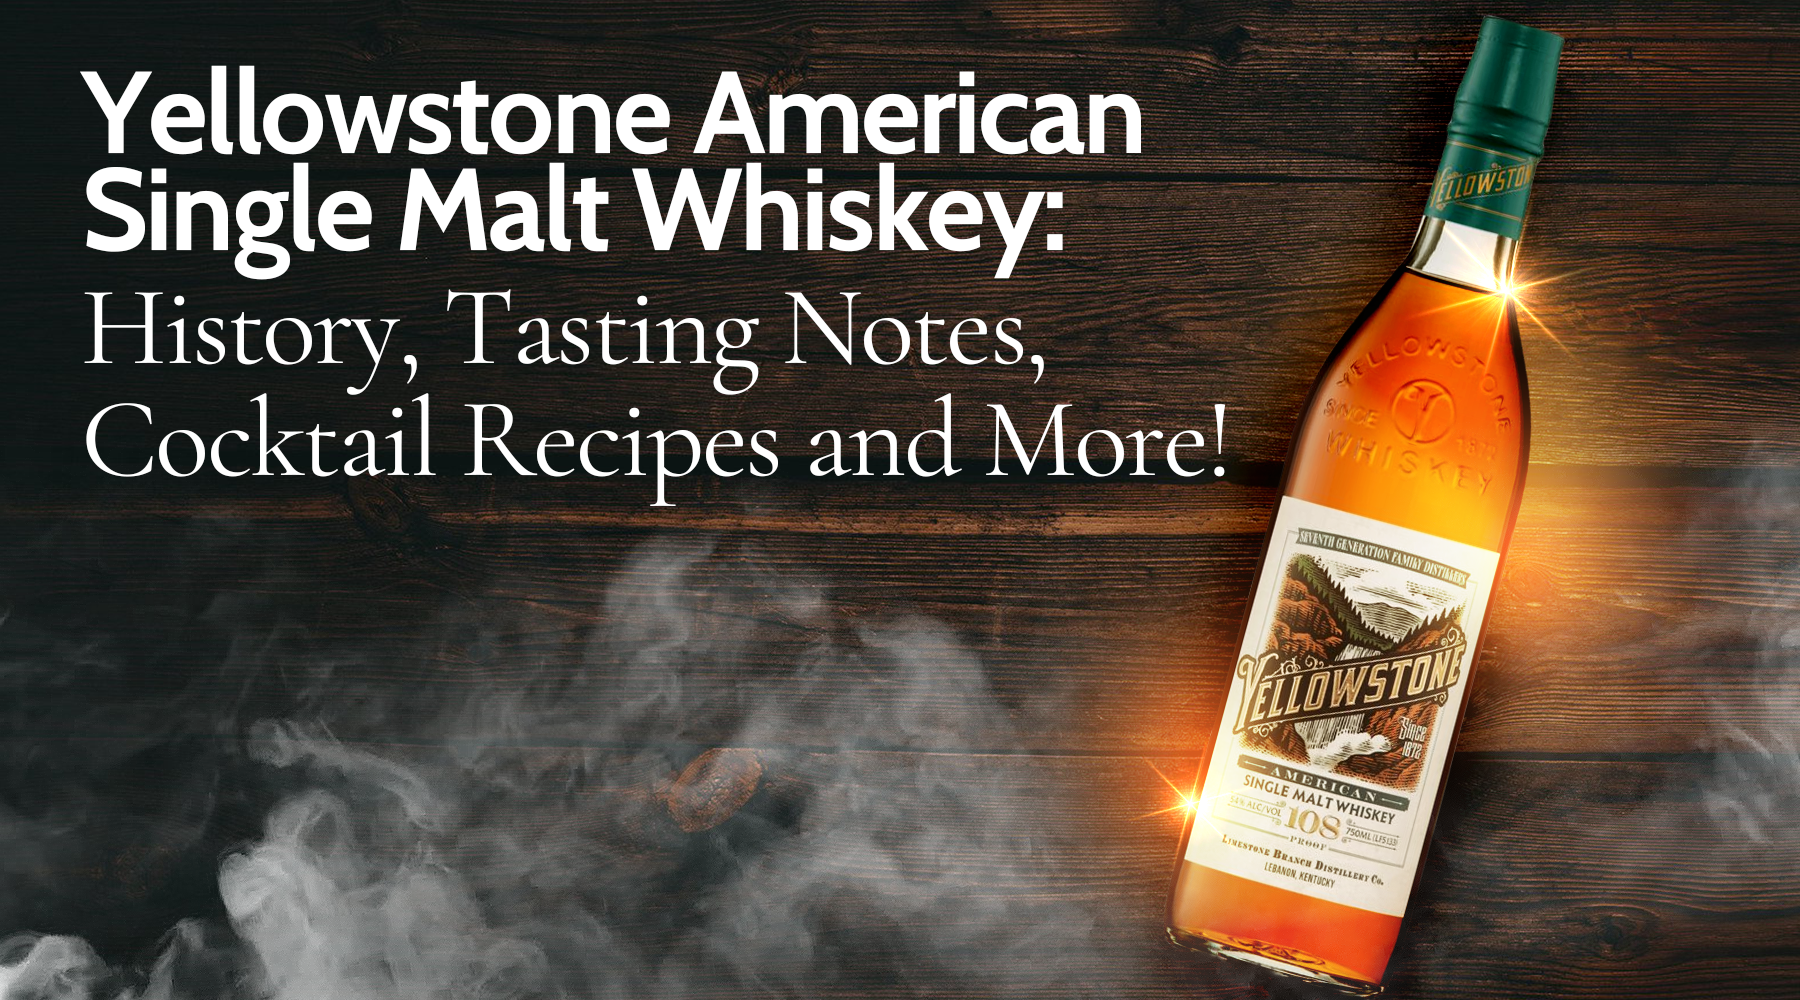 Yellowstone American Single Malt Whiskey: History, Tasting Notes, Cocktail Recipes and More!